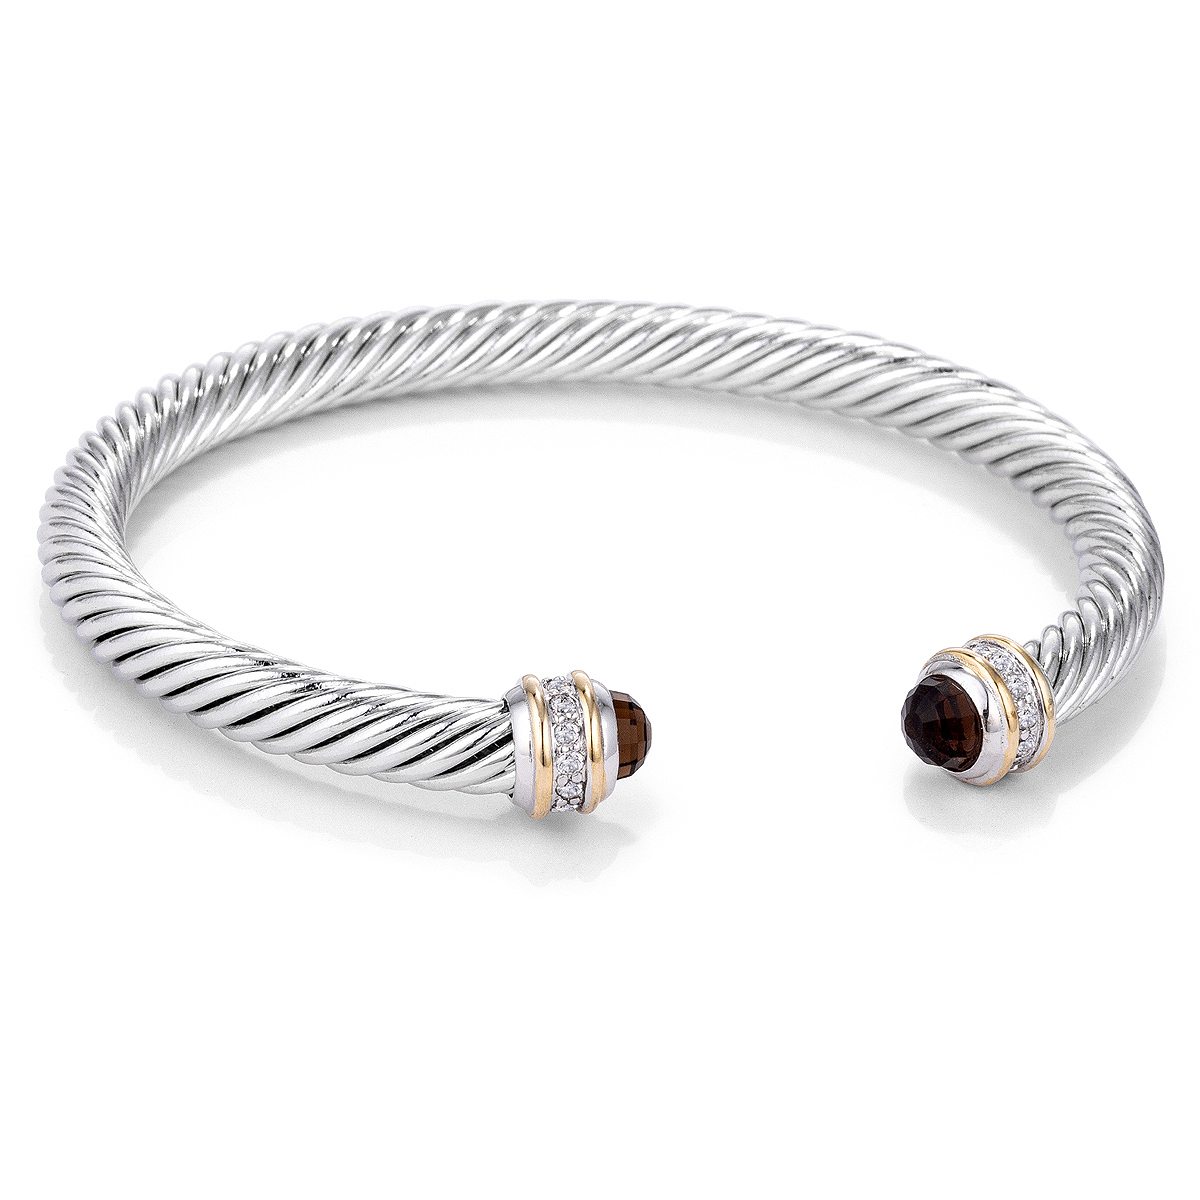 Silver Cable Bangle with Smokey Topaz Crystal